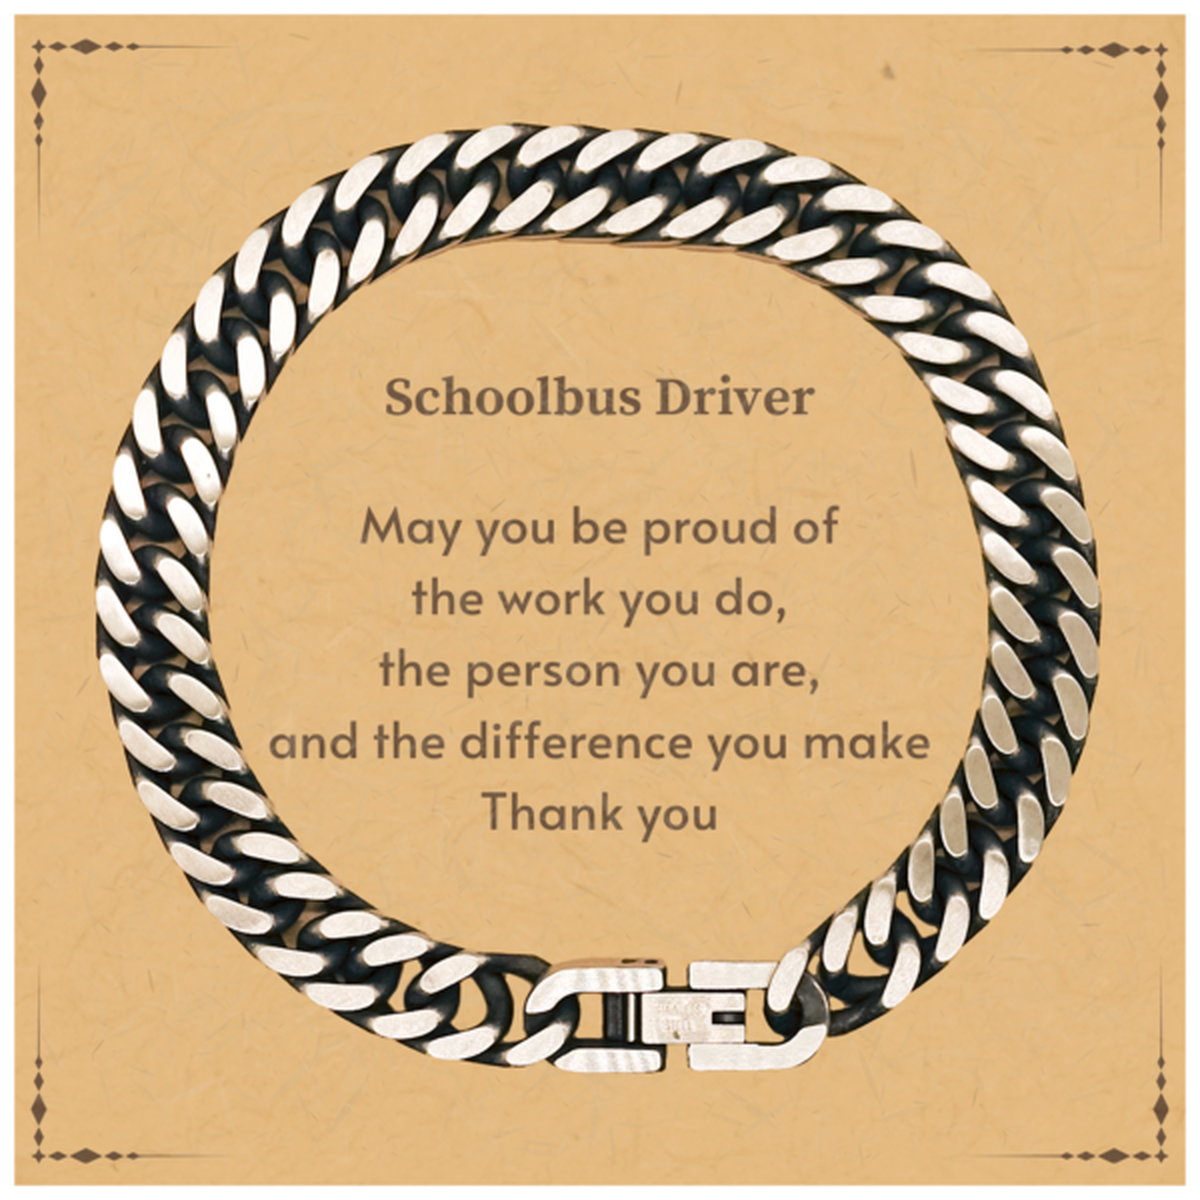 Heartwarming Cuban Link Chain Bracelet Retirement Coworkers Gifts for Schoolbus Driver, Schoolbus Driver May You be proud of the work you do, the person you are Gifts for Boss Men Women Friends